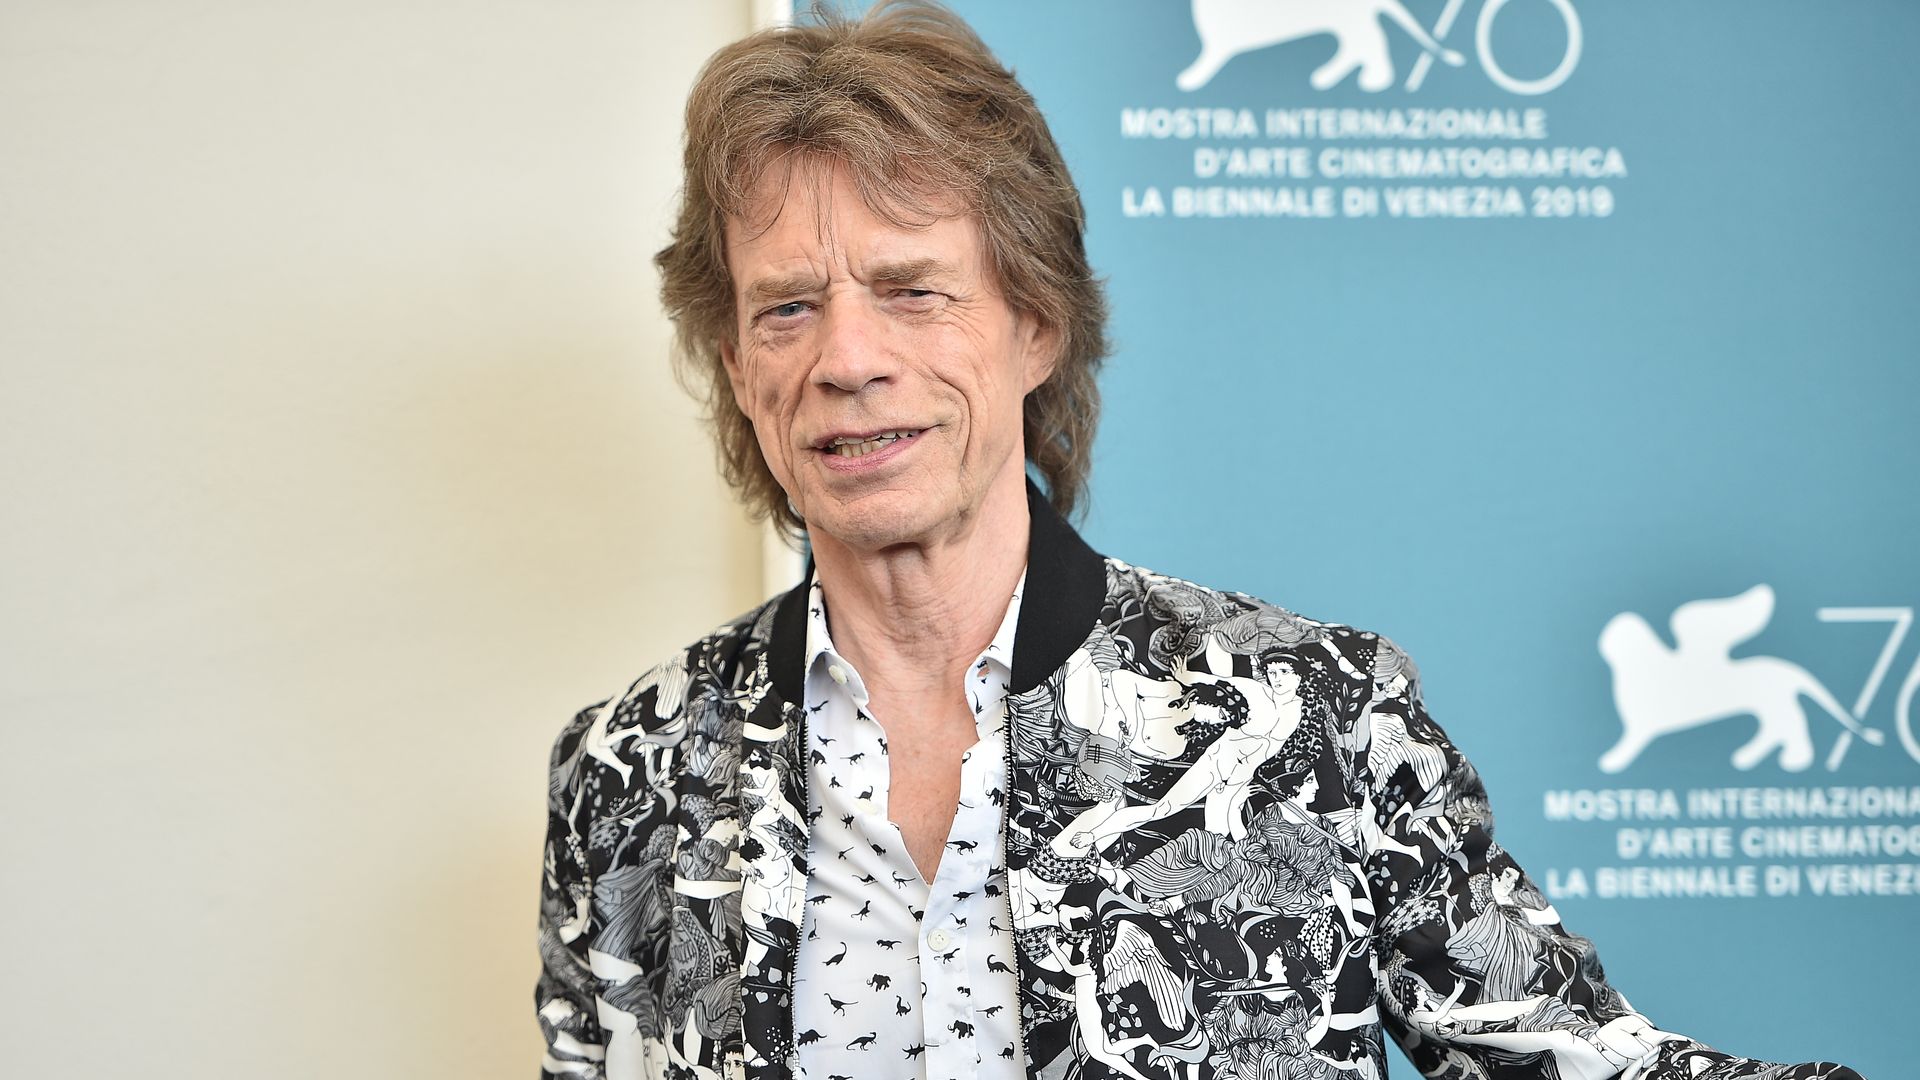 Mick Jagger attends "The Burnt Orange Heresy" photocall during the 76th Venice Film Festival at Sala Grande on September 07, 2019 in Venice, Italy